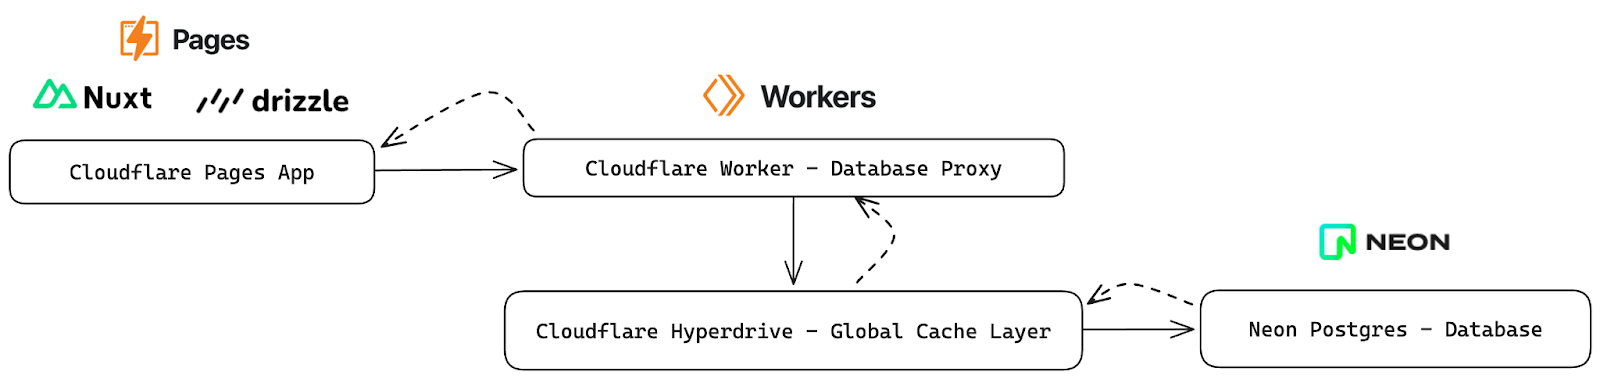 Nuxt with Cloudflare Pages, Workers, Hyperdrive, and Neon Serverless Postgres